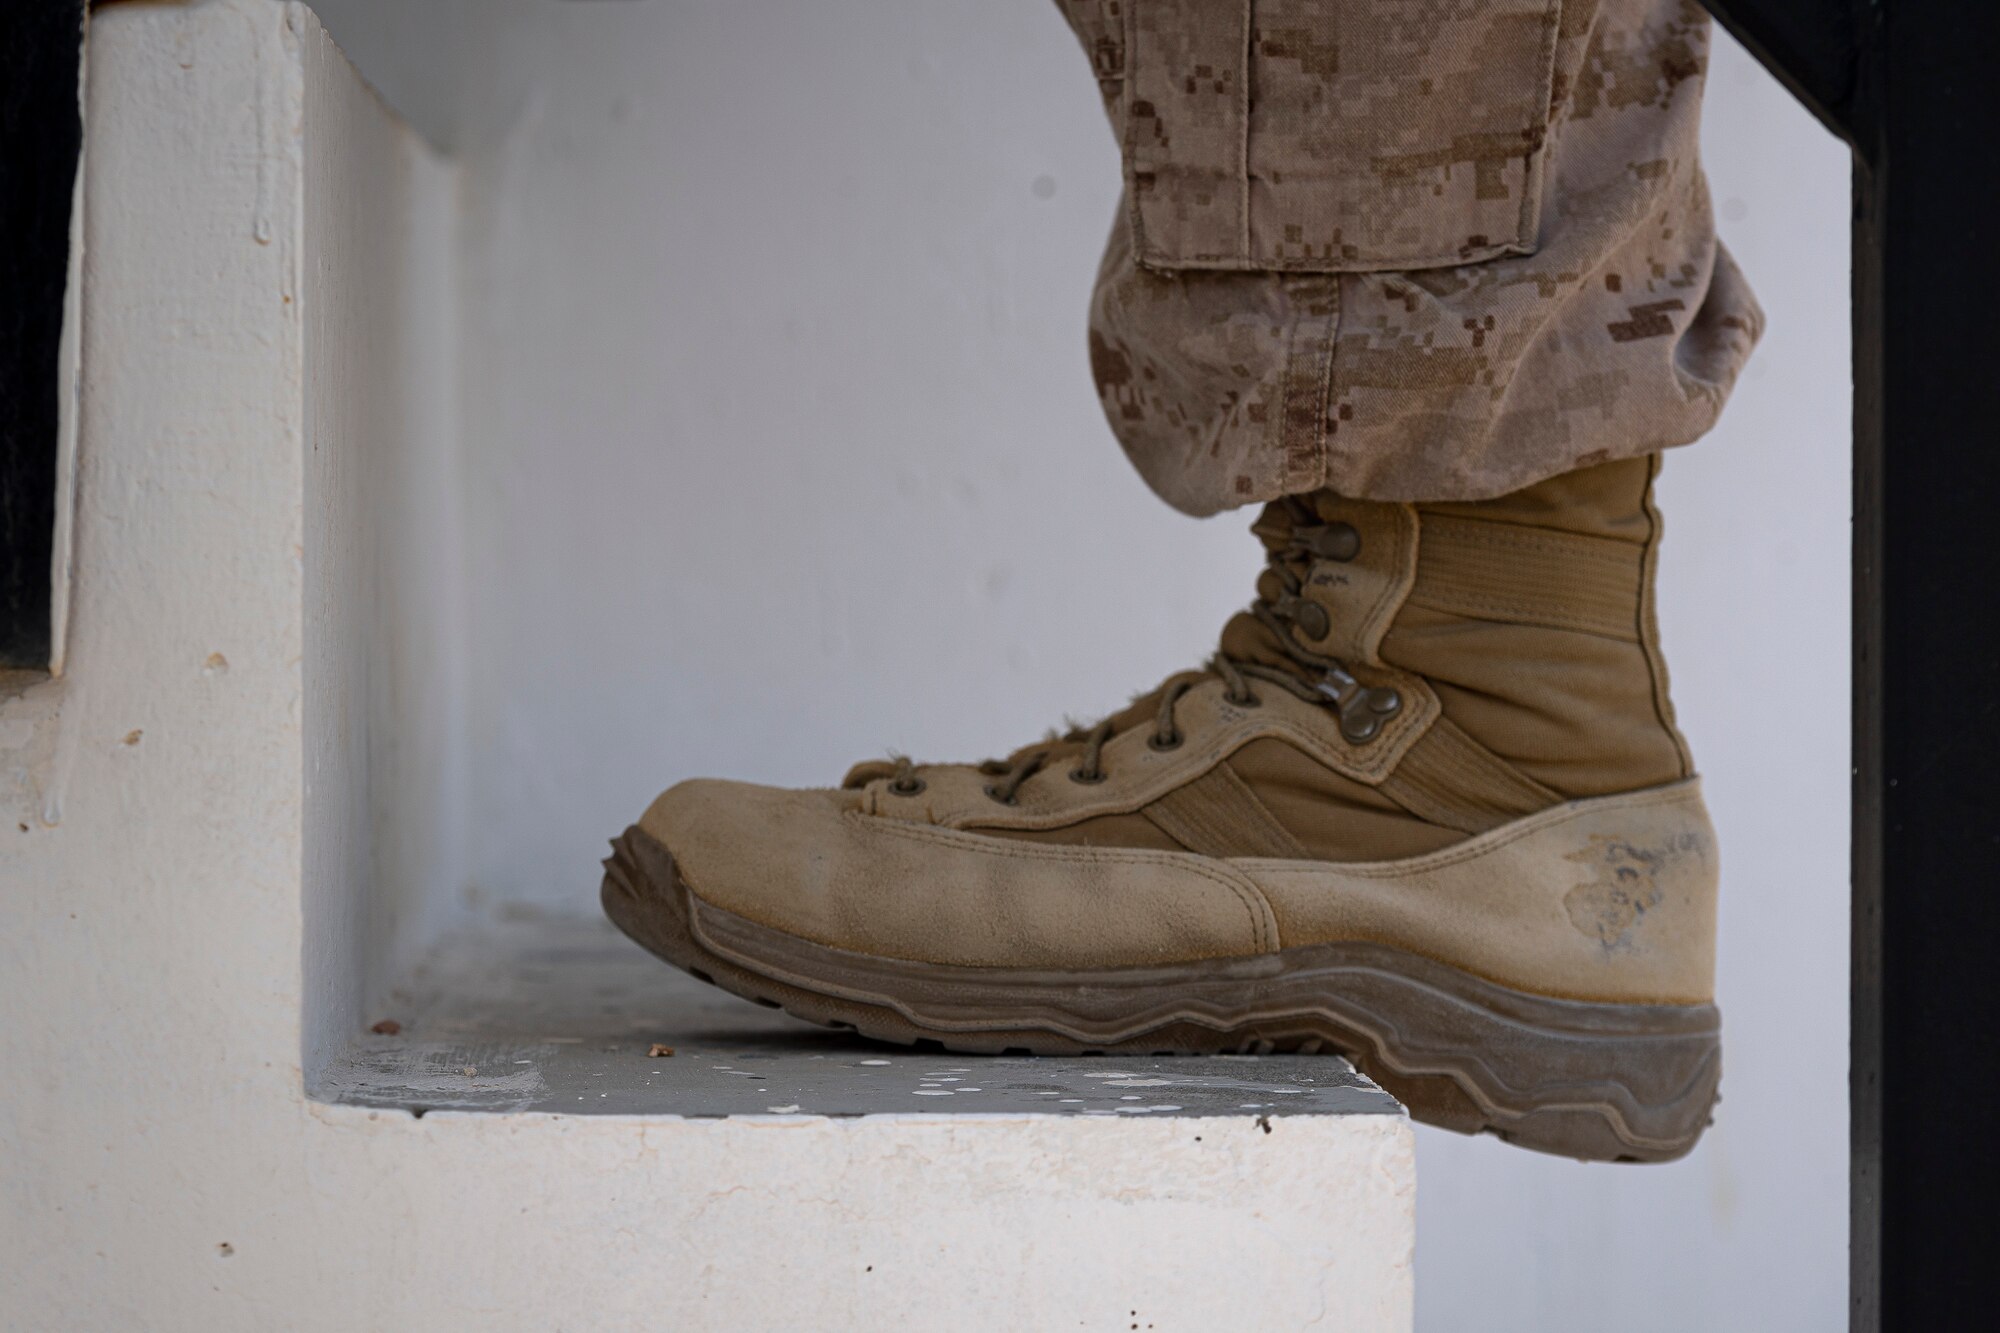 A photo of a Marine climbing stairs